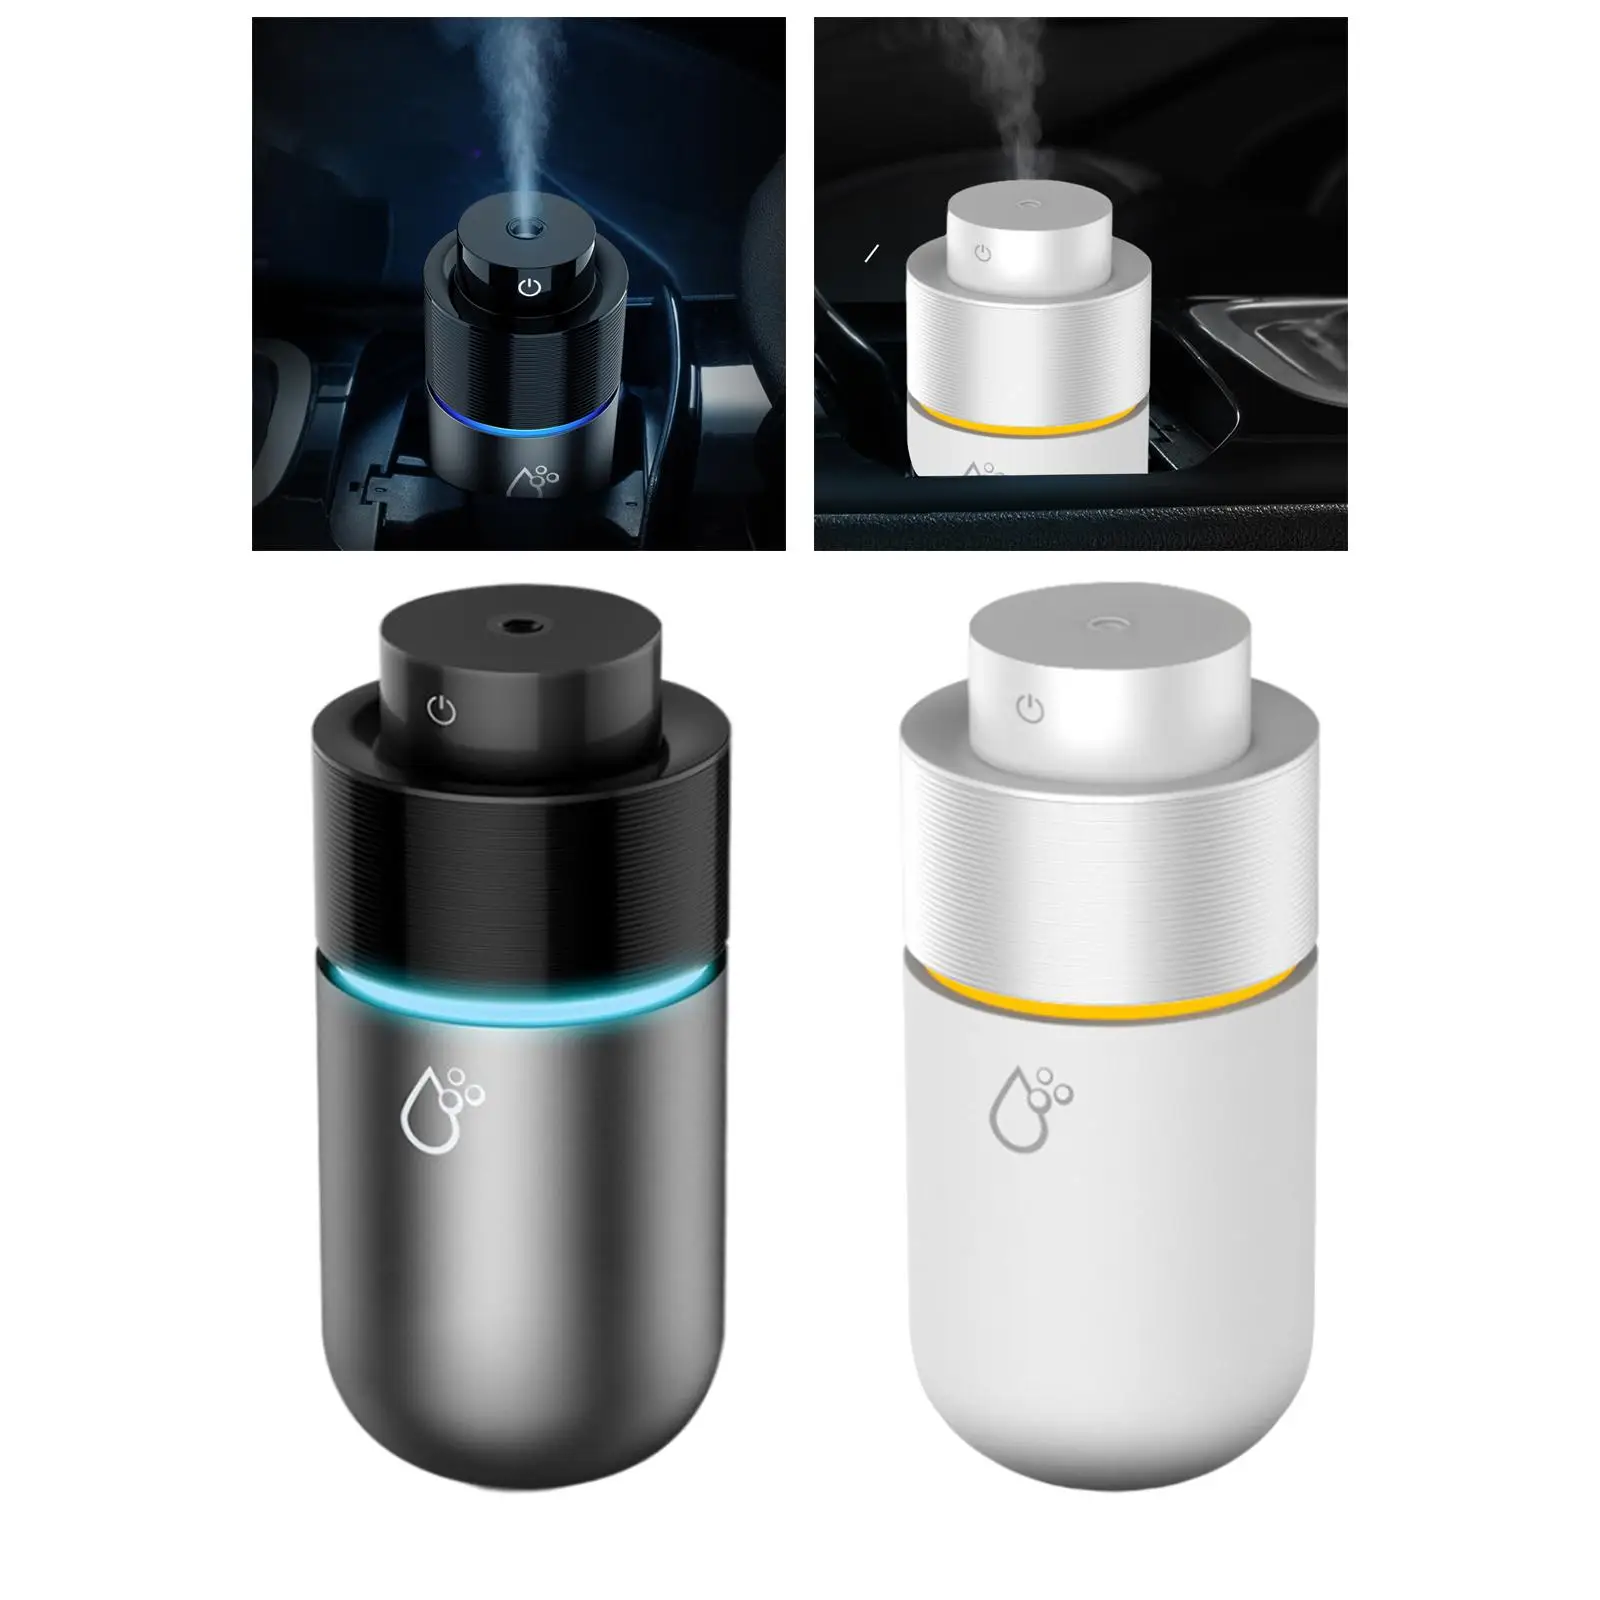  Air Humidifier USB Diffuser for Living Room Table